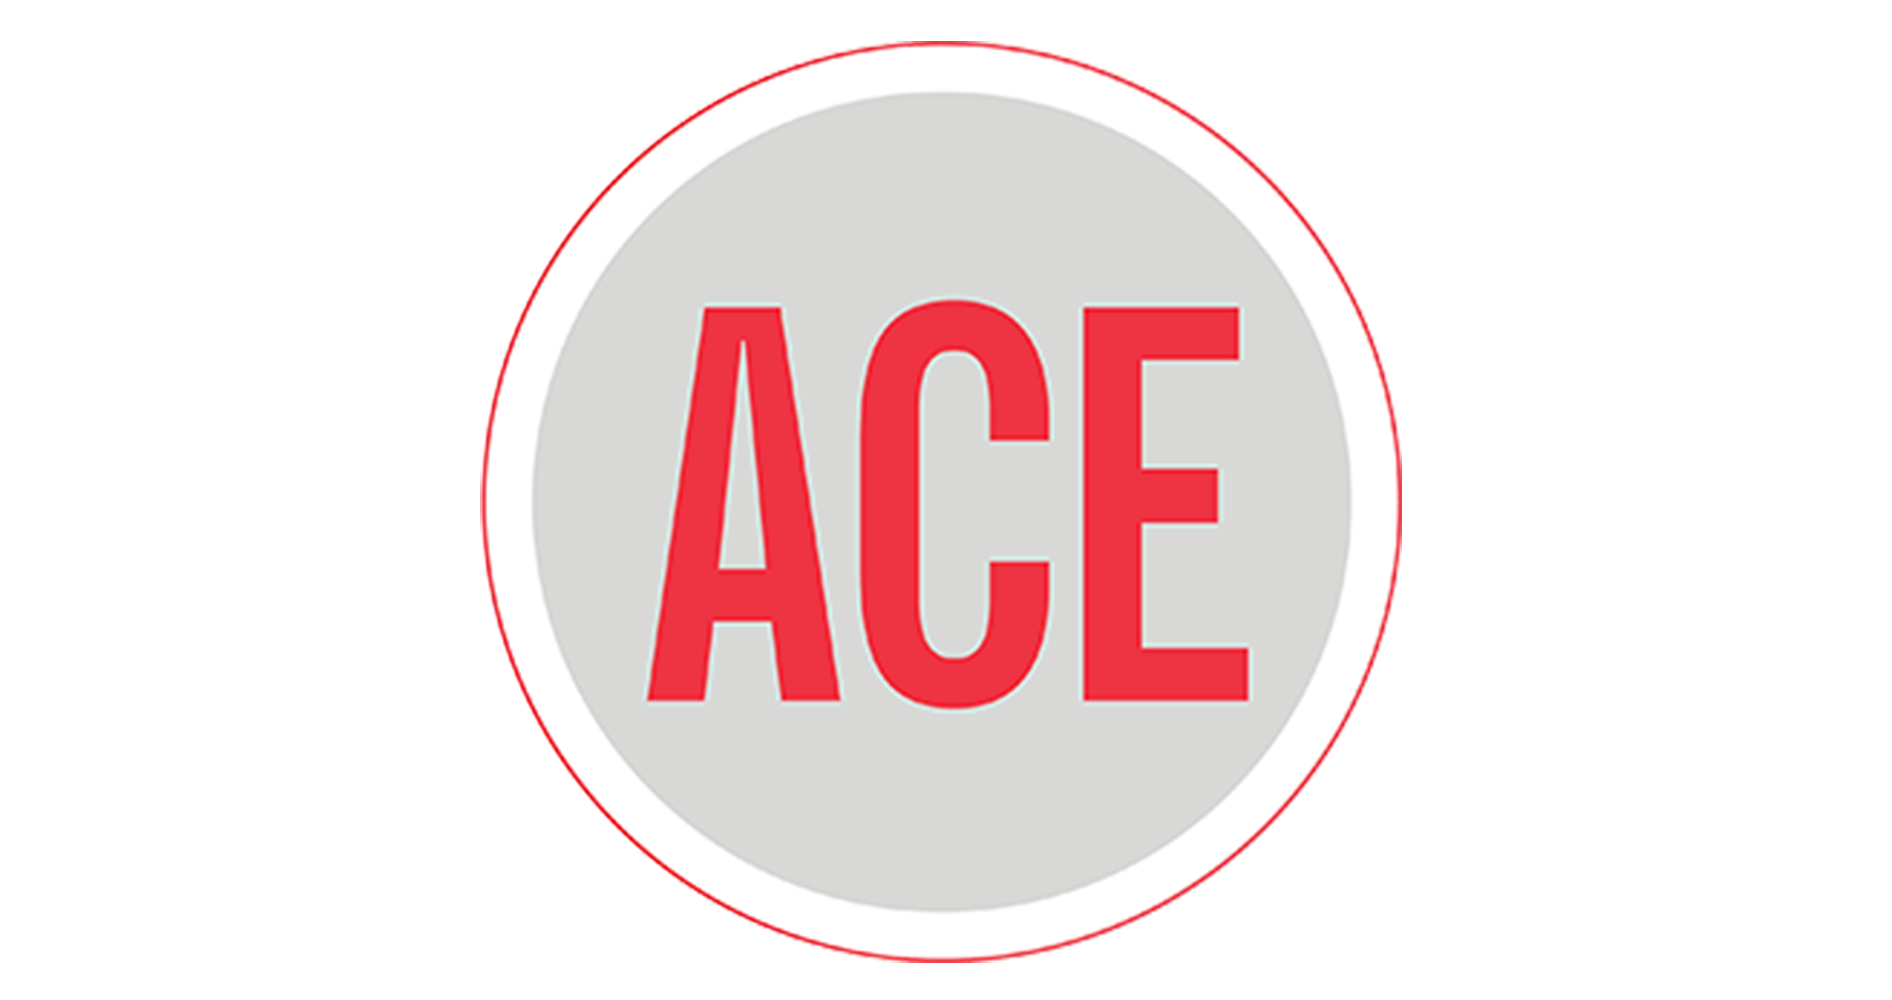 ACE’s Statement of Solidarity with the Black Lives Matter Movement